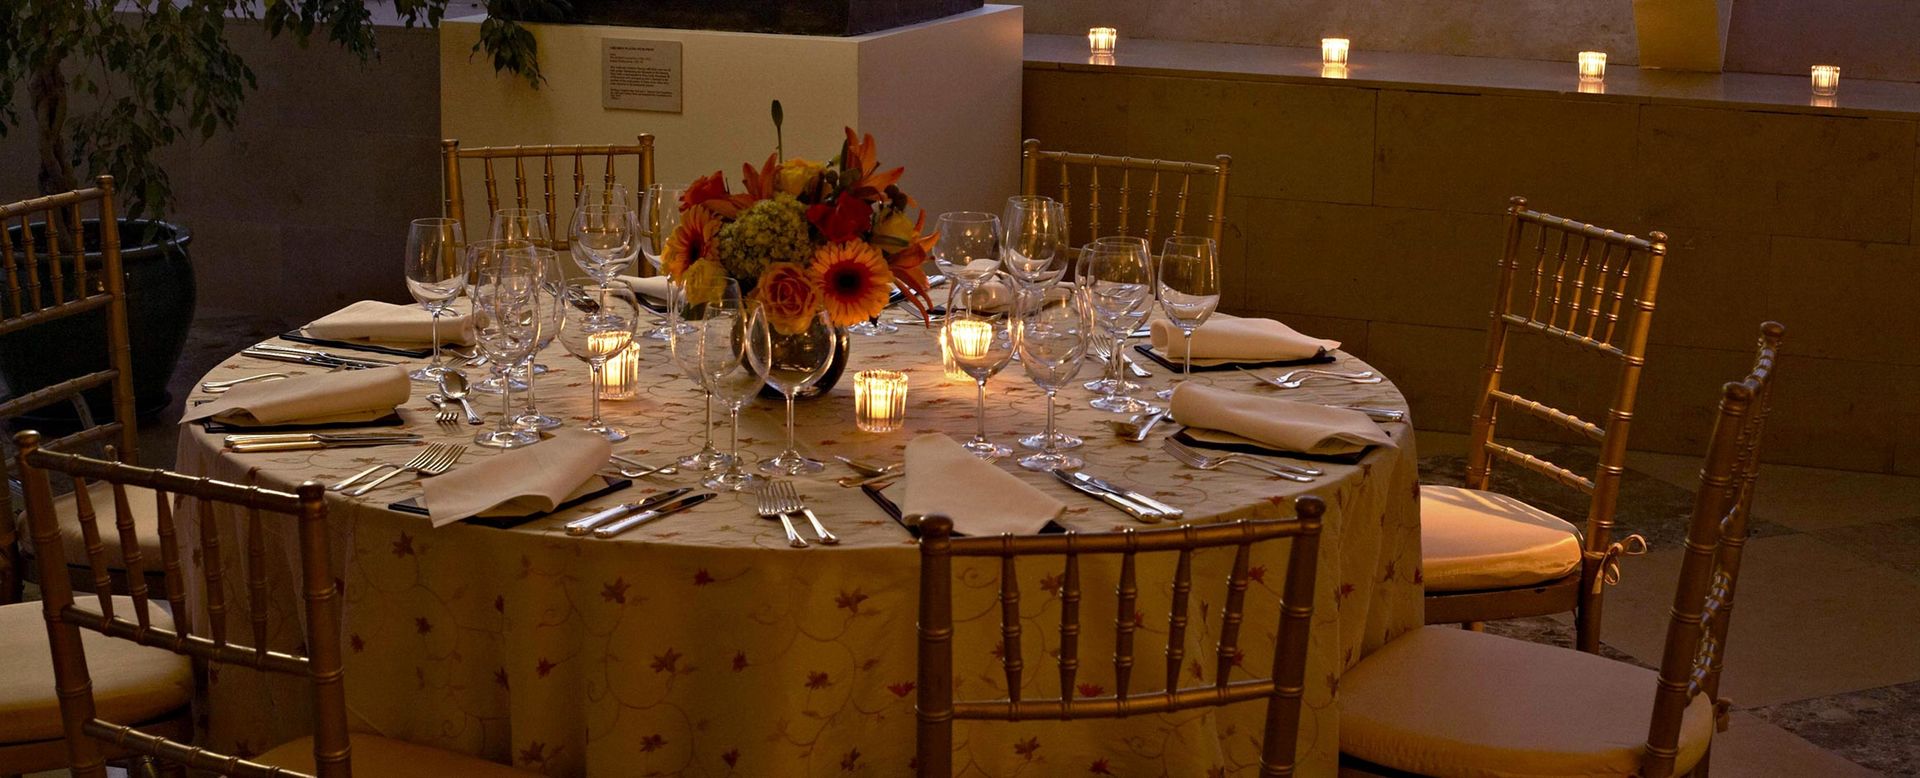 Circular table with flowers in the middle and low lit candles during the evening